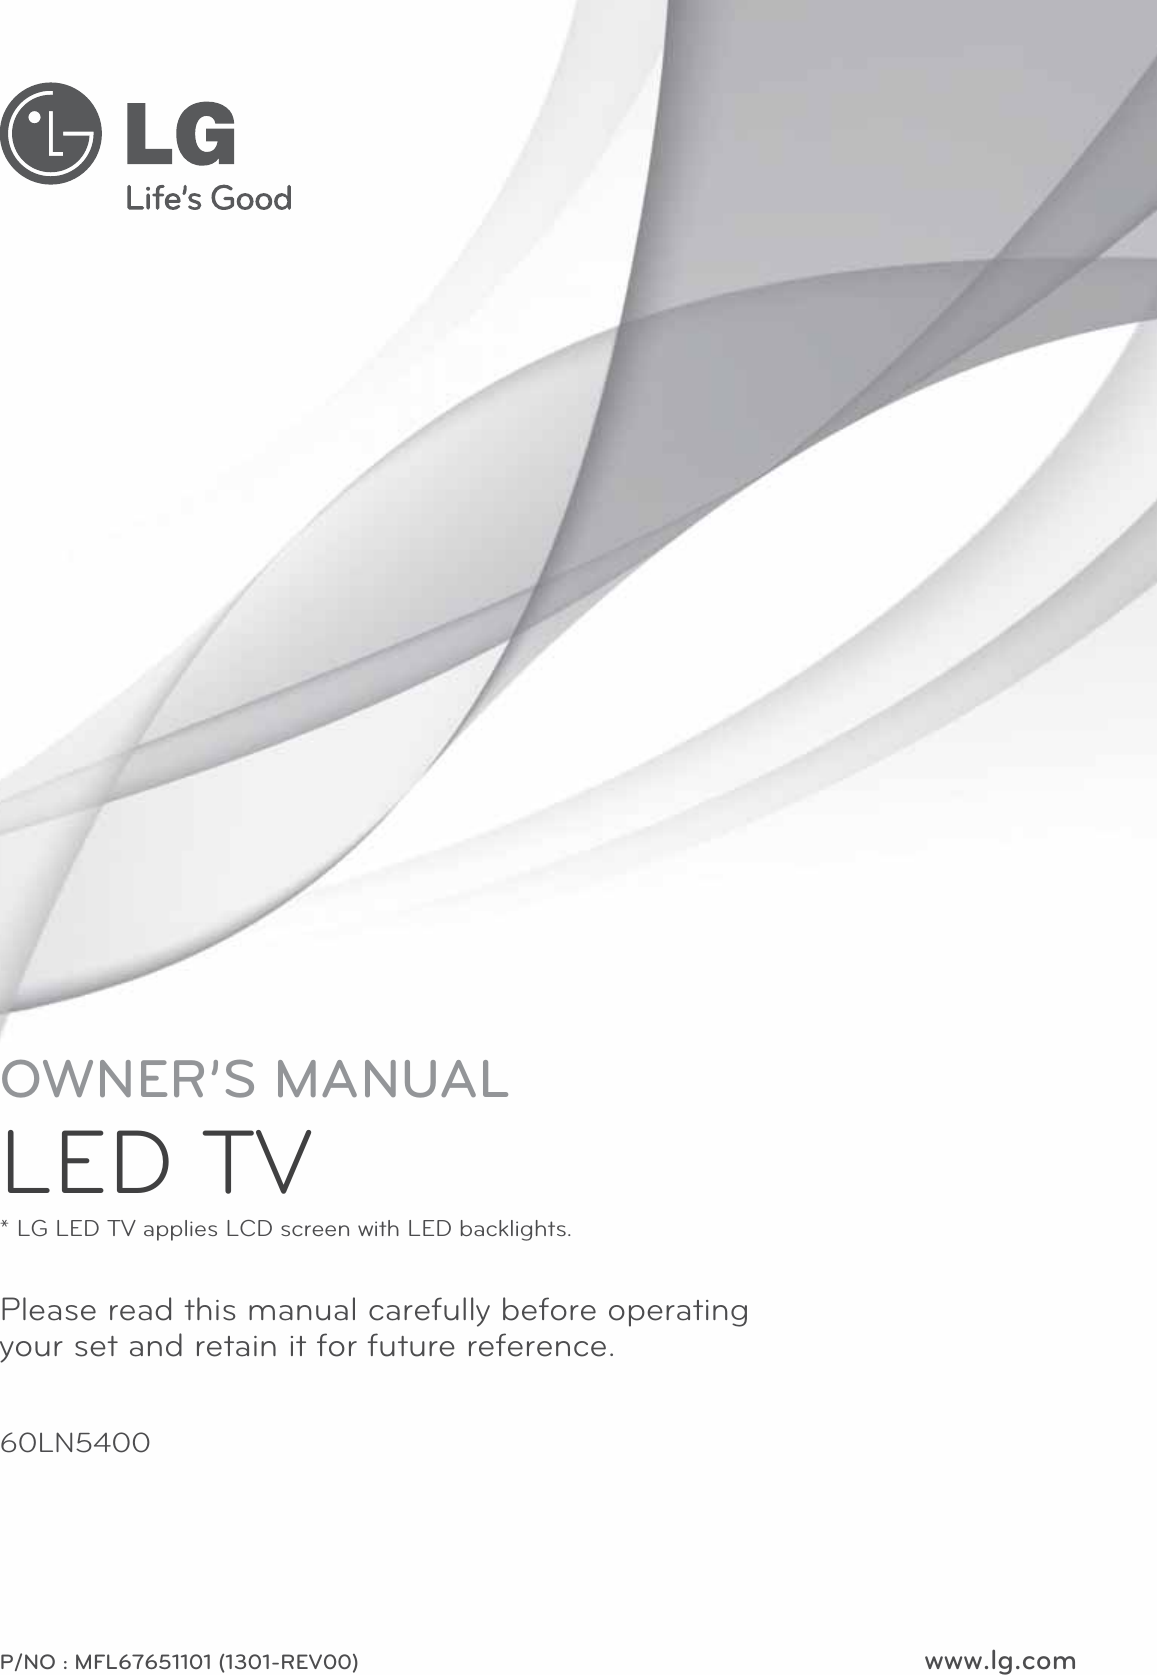 www.lg.comP/NO : MFL67651101 (1301-REV00)Please read this manual carefully before operating your set and retain it for future reference.OWNER’S MANUALLED TV* LG LED TV applies LCD screen with LED backlights.60LN5400